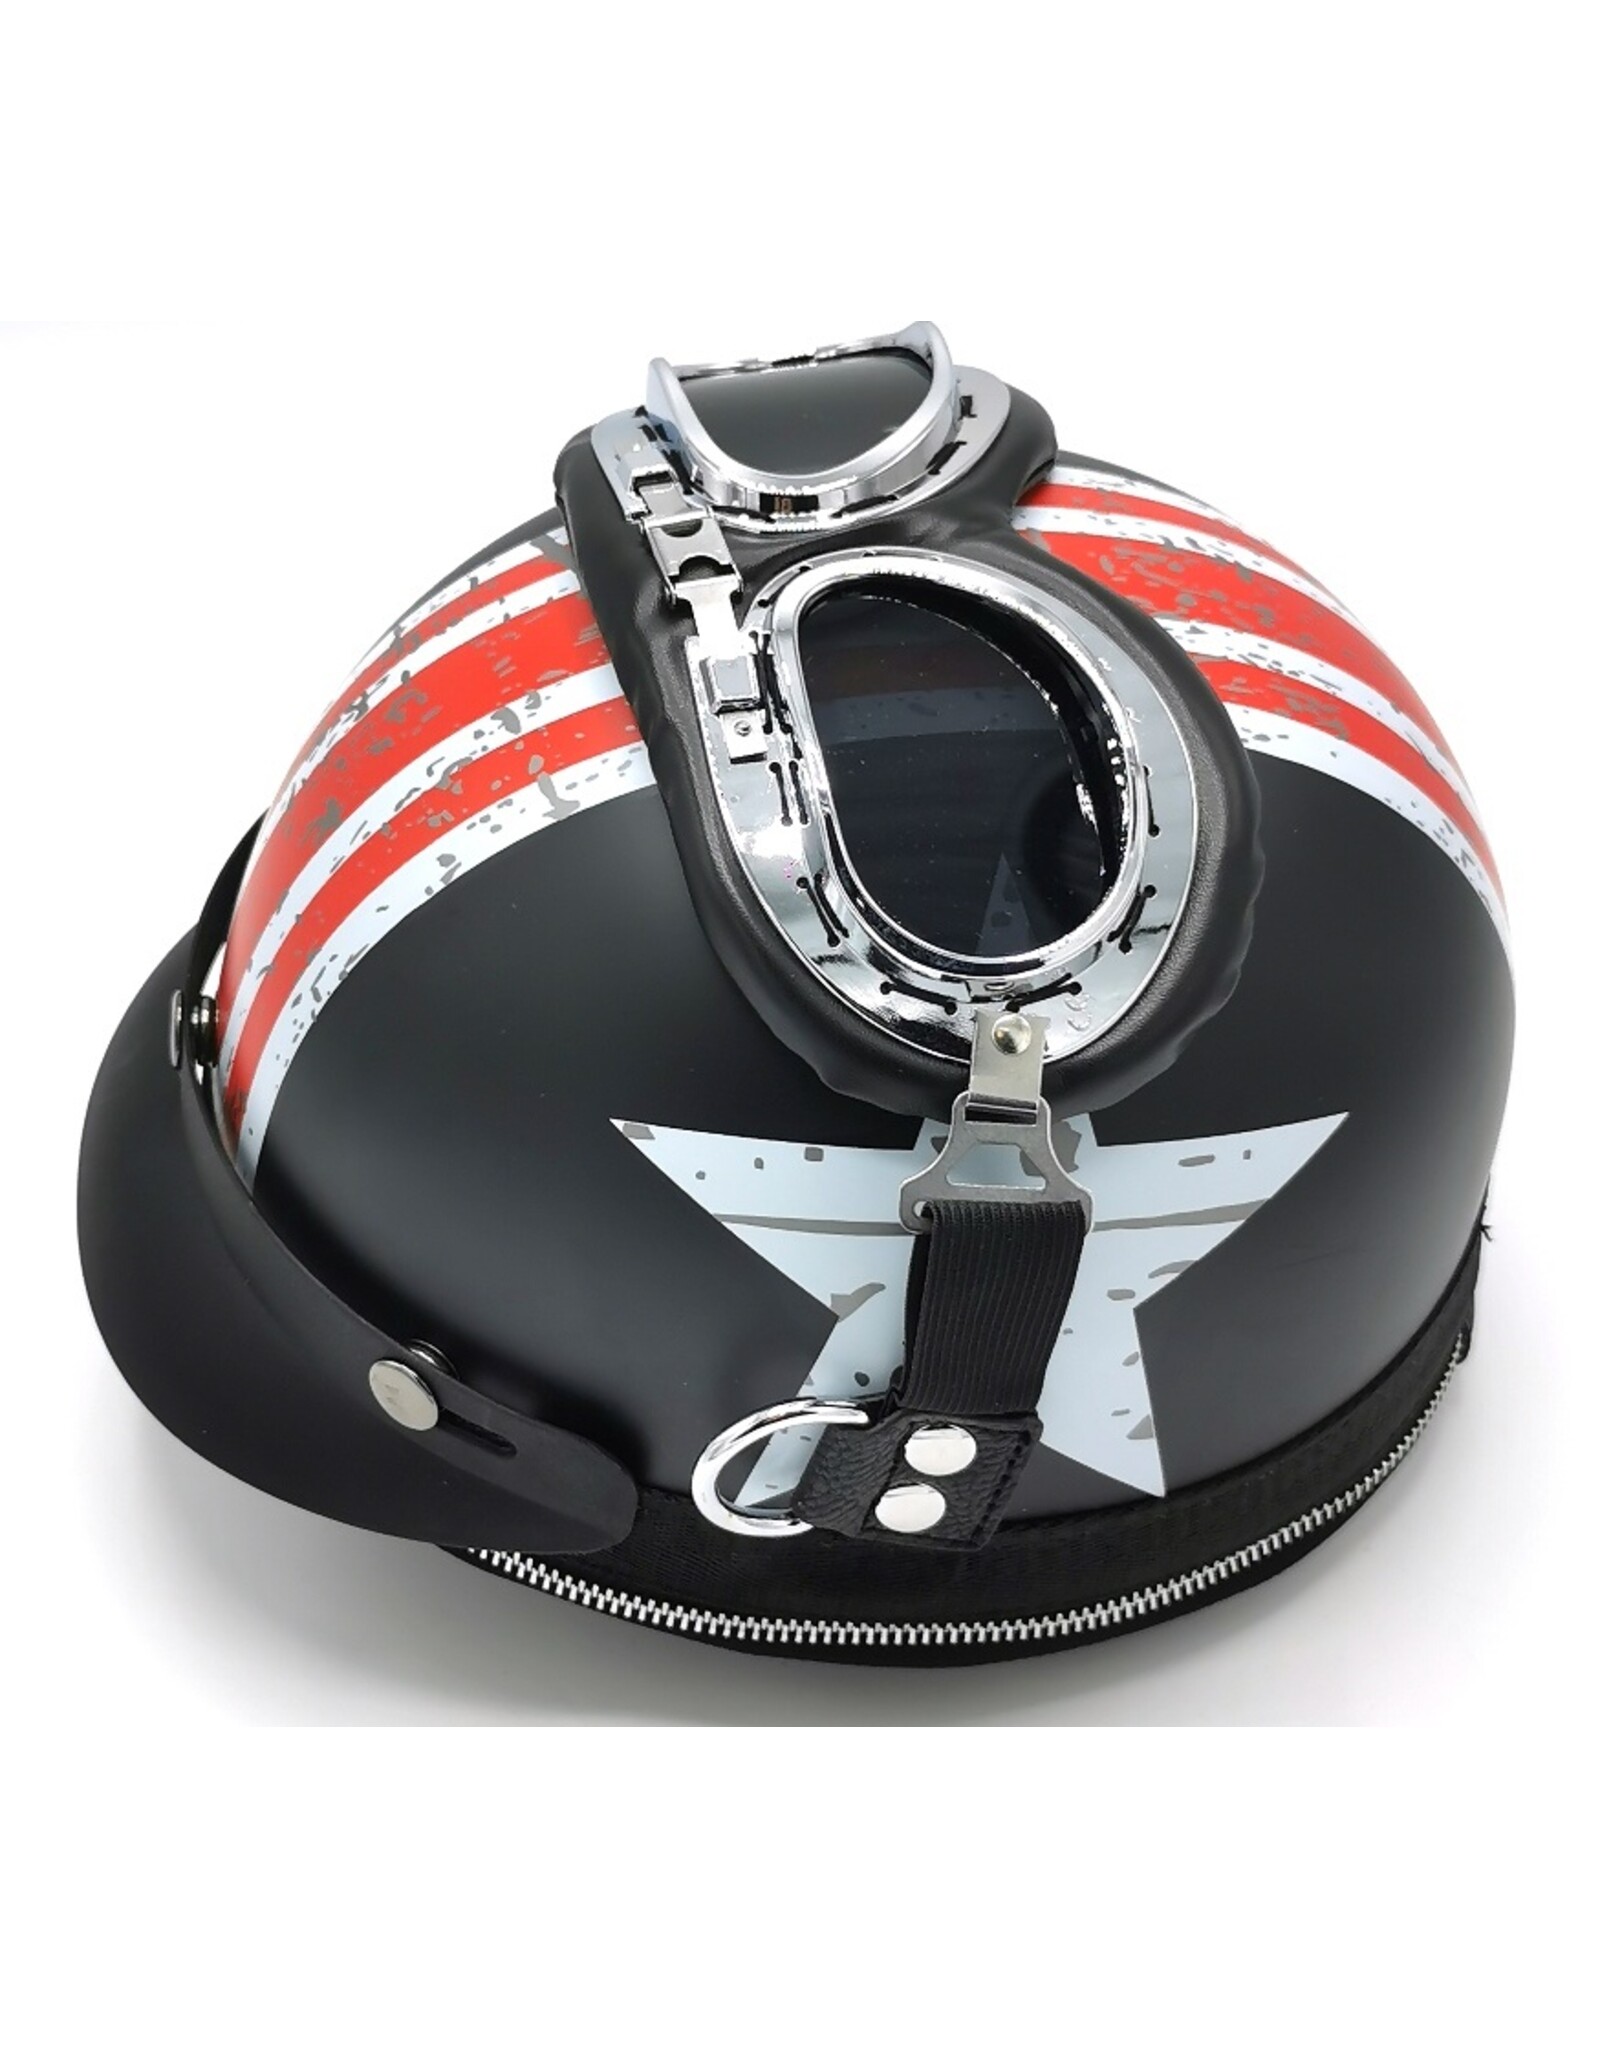 Magic Bags Fantasy bags and wallets - Motorbike helmet backpack With Star and Stripes